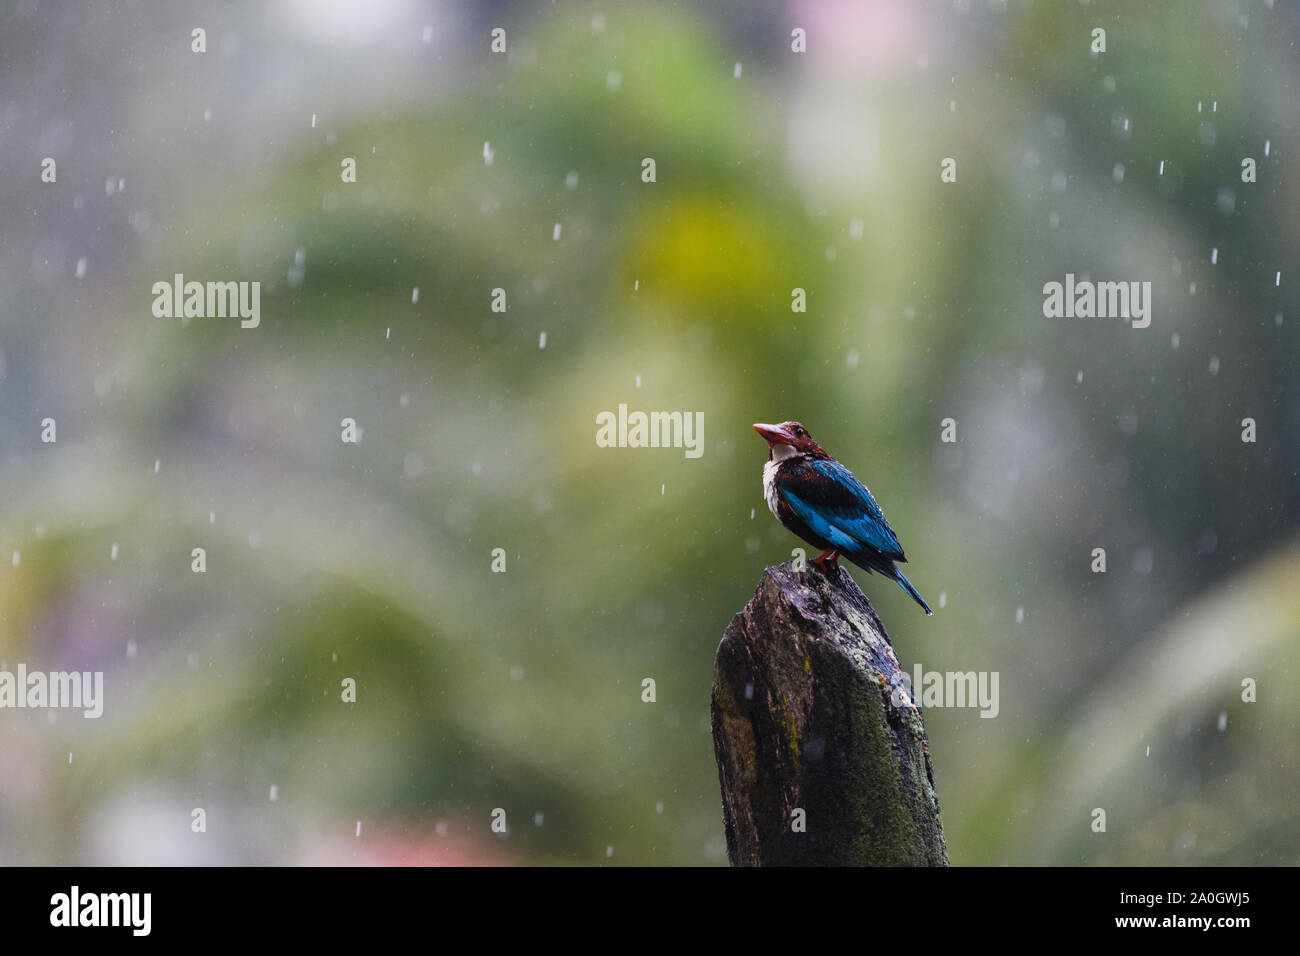 White throated Kingfisher fully drenched in rain perched on a wooden Electric pole on a rainy day and trying to dry its feathers Stock Photo